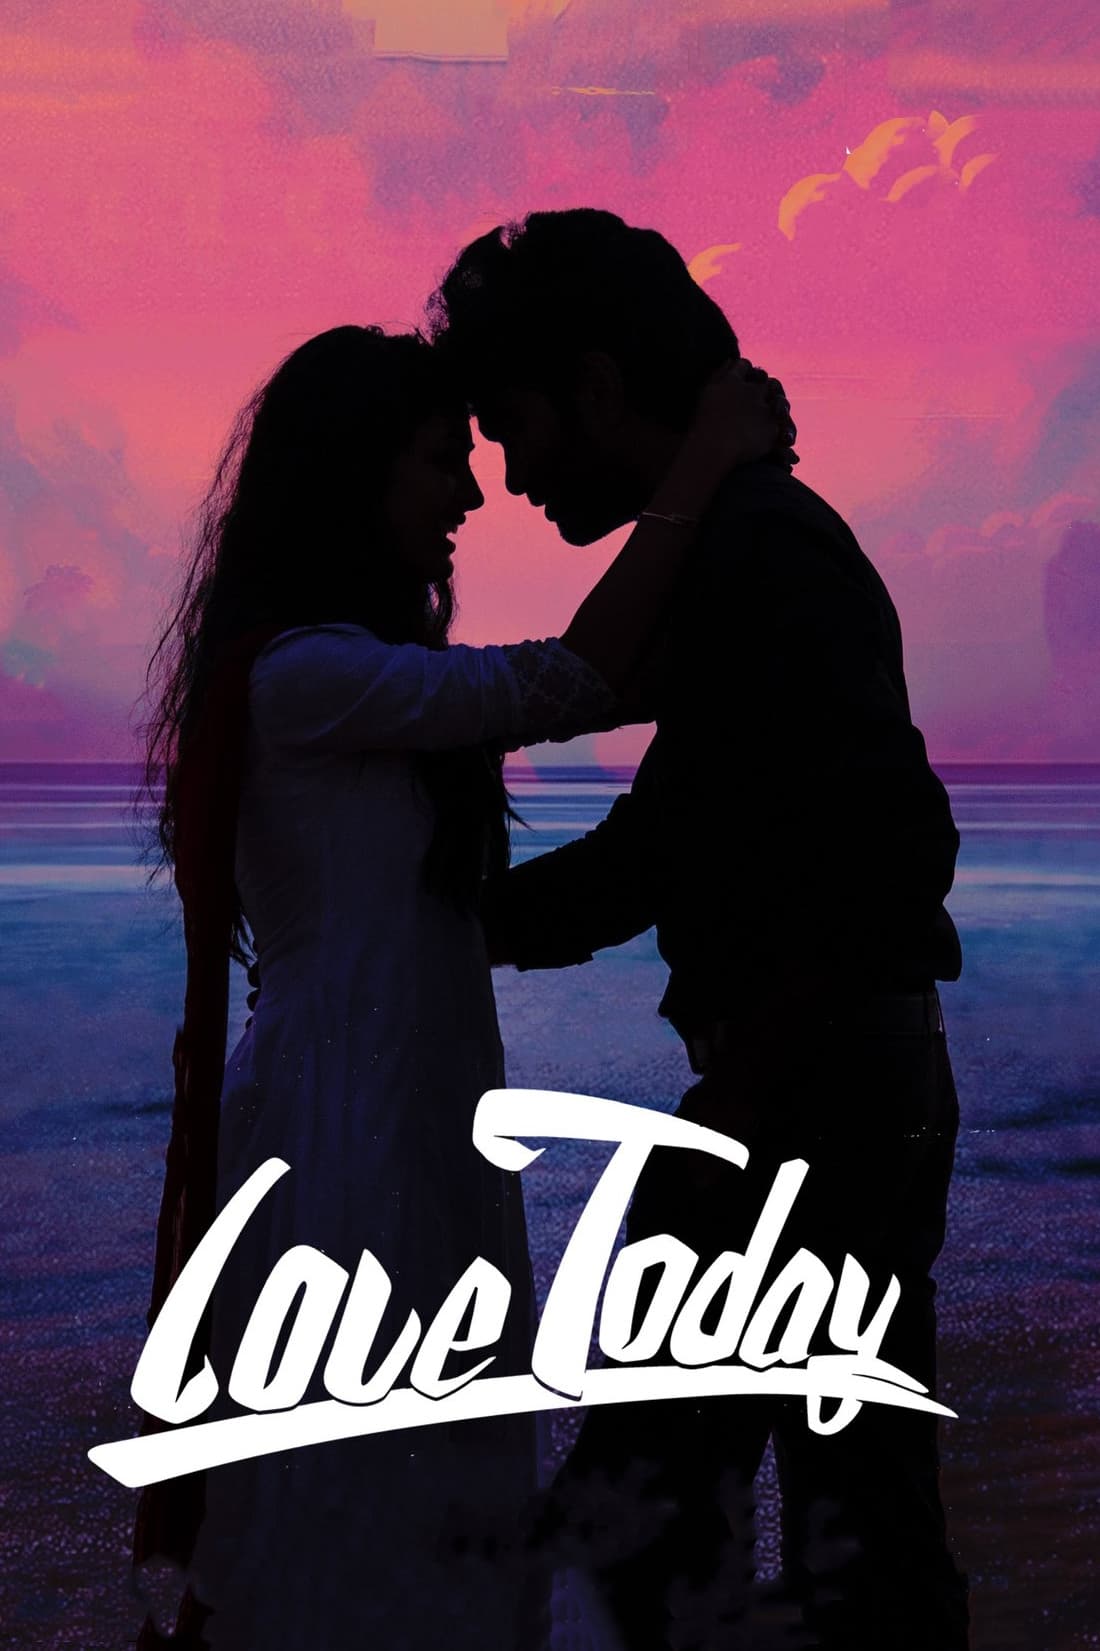 Poster for the movie "Love Today"